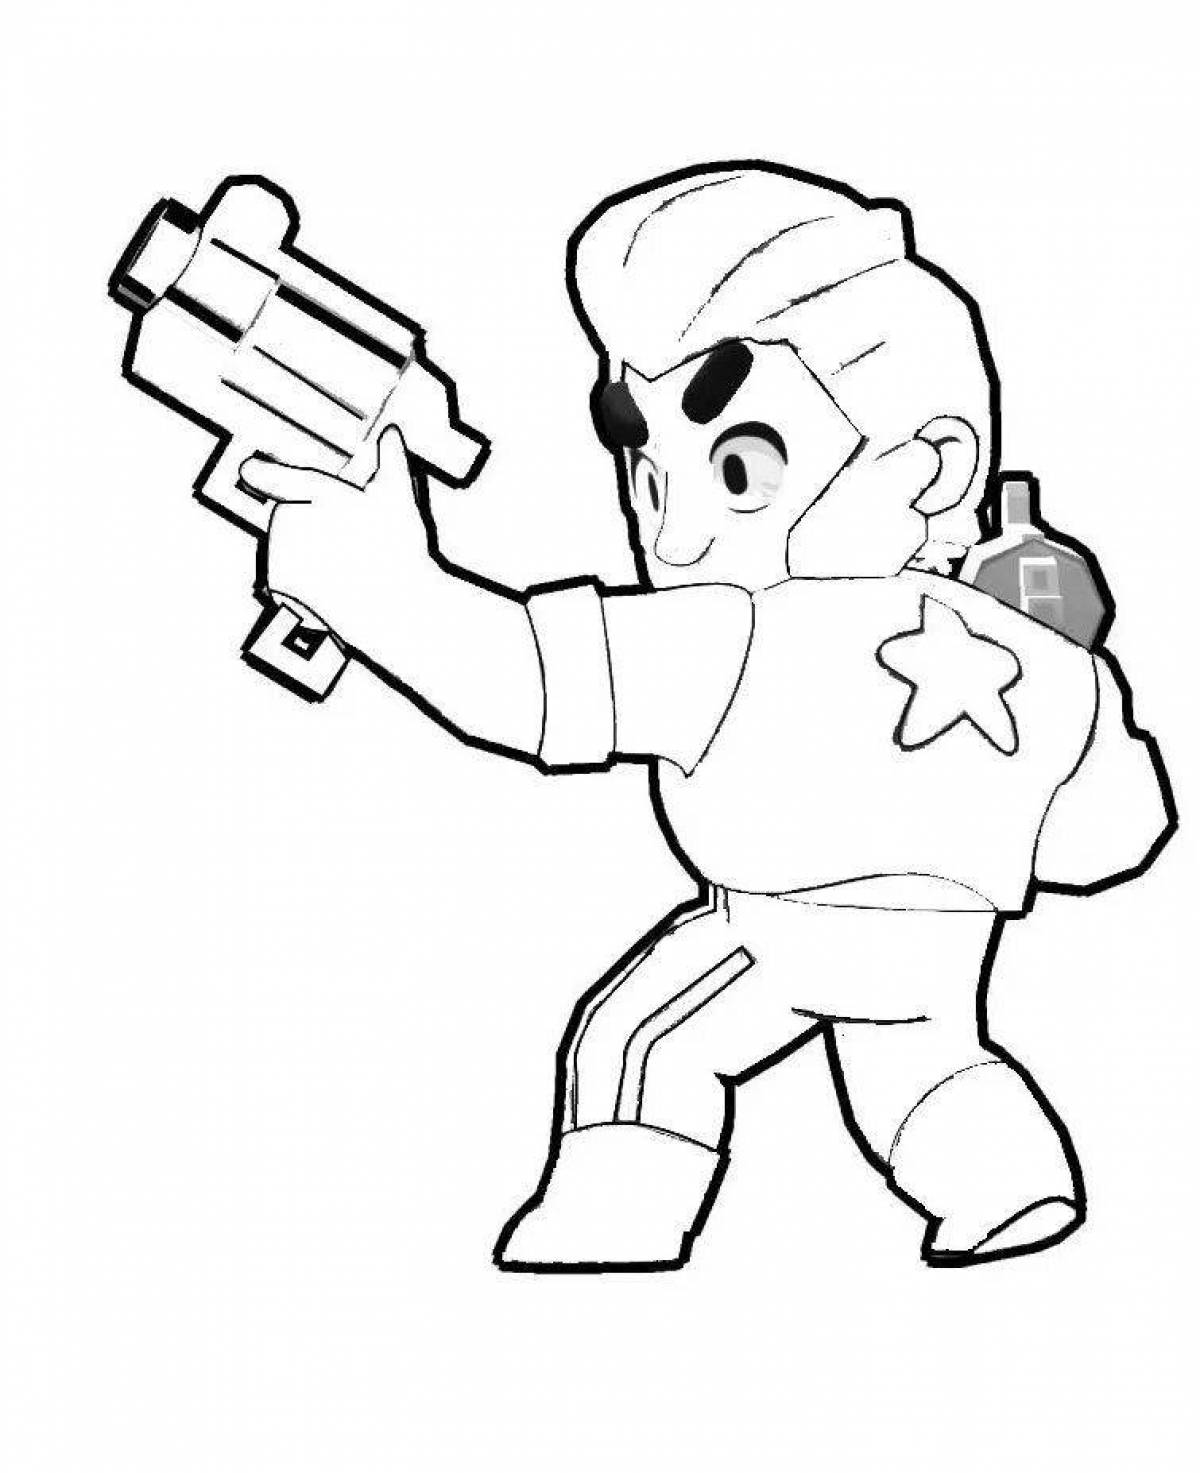 Awesome bravo stars colt coloring page